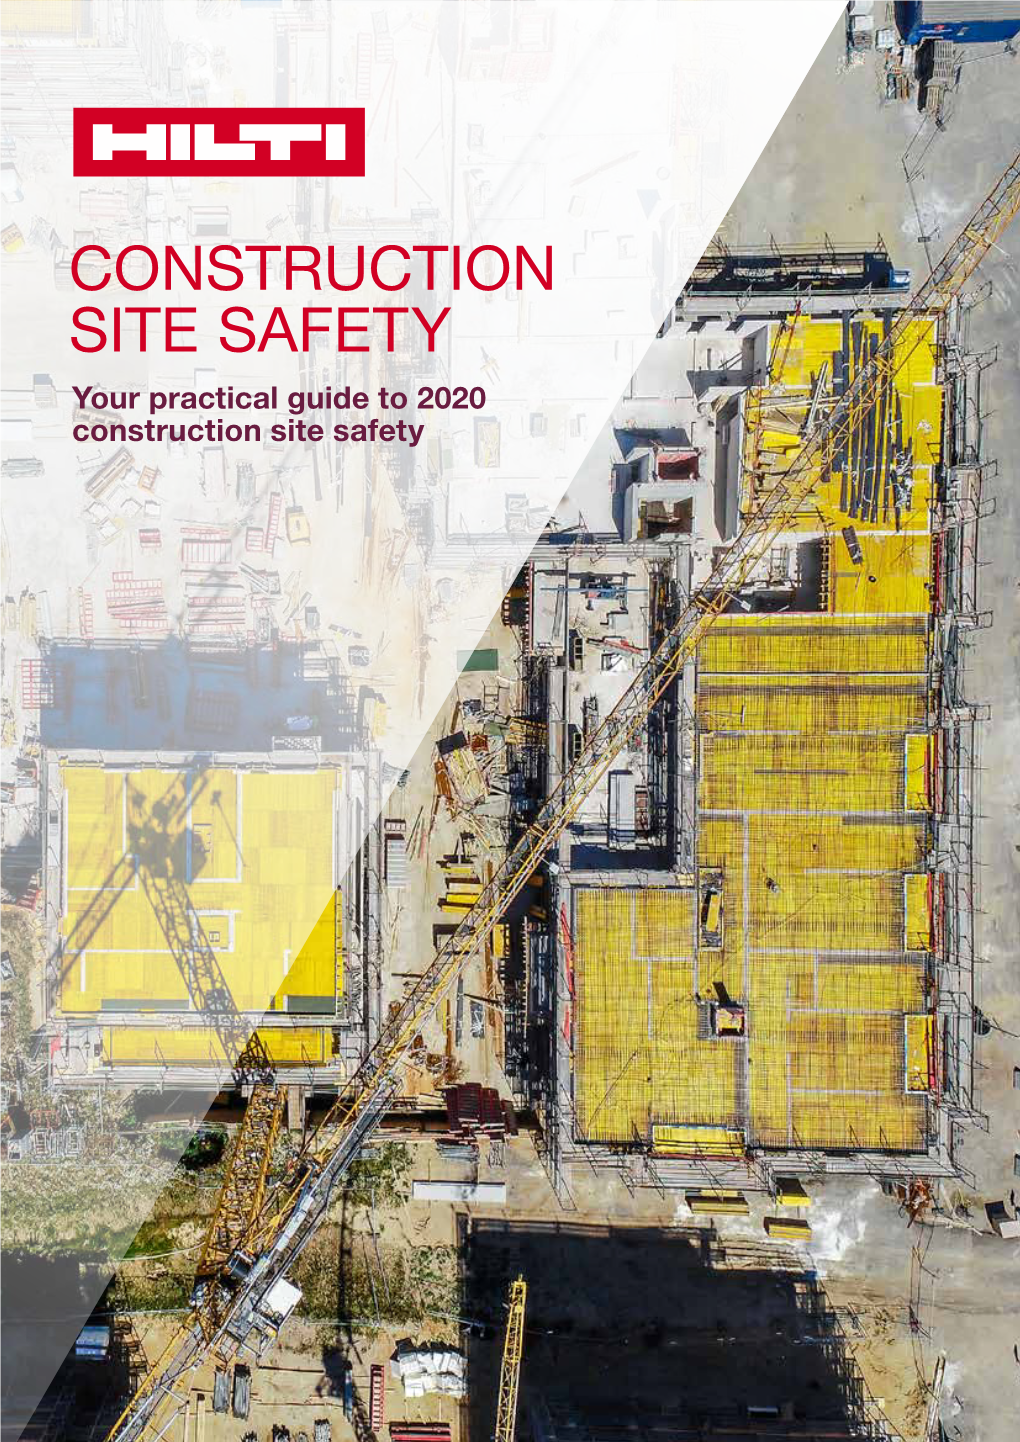 CONSTRUCTION SITE SAFETY Your Practical Guide to 2020 Construction Site Safety INTRODUCTION